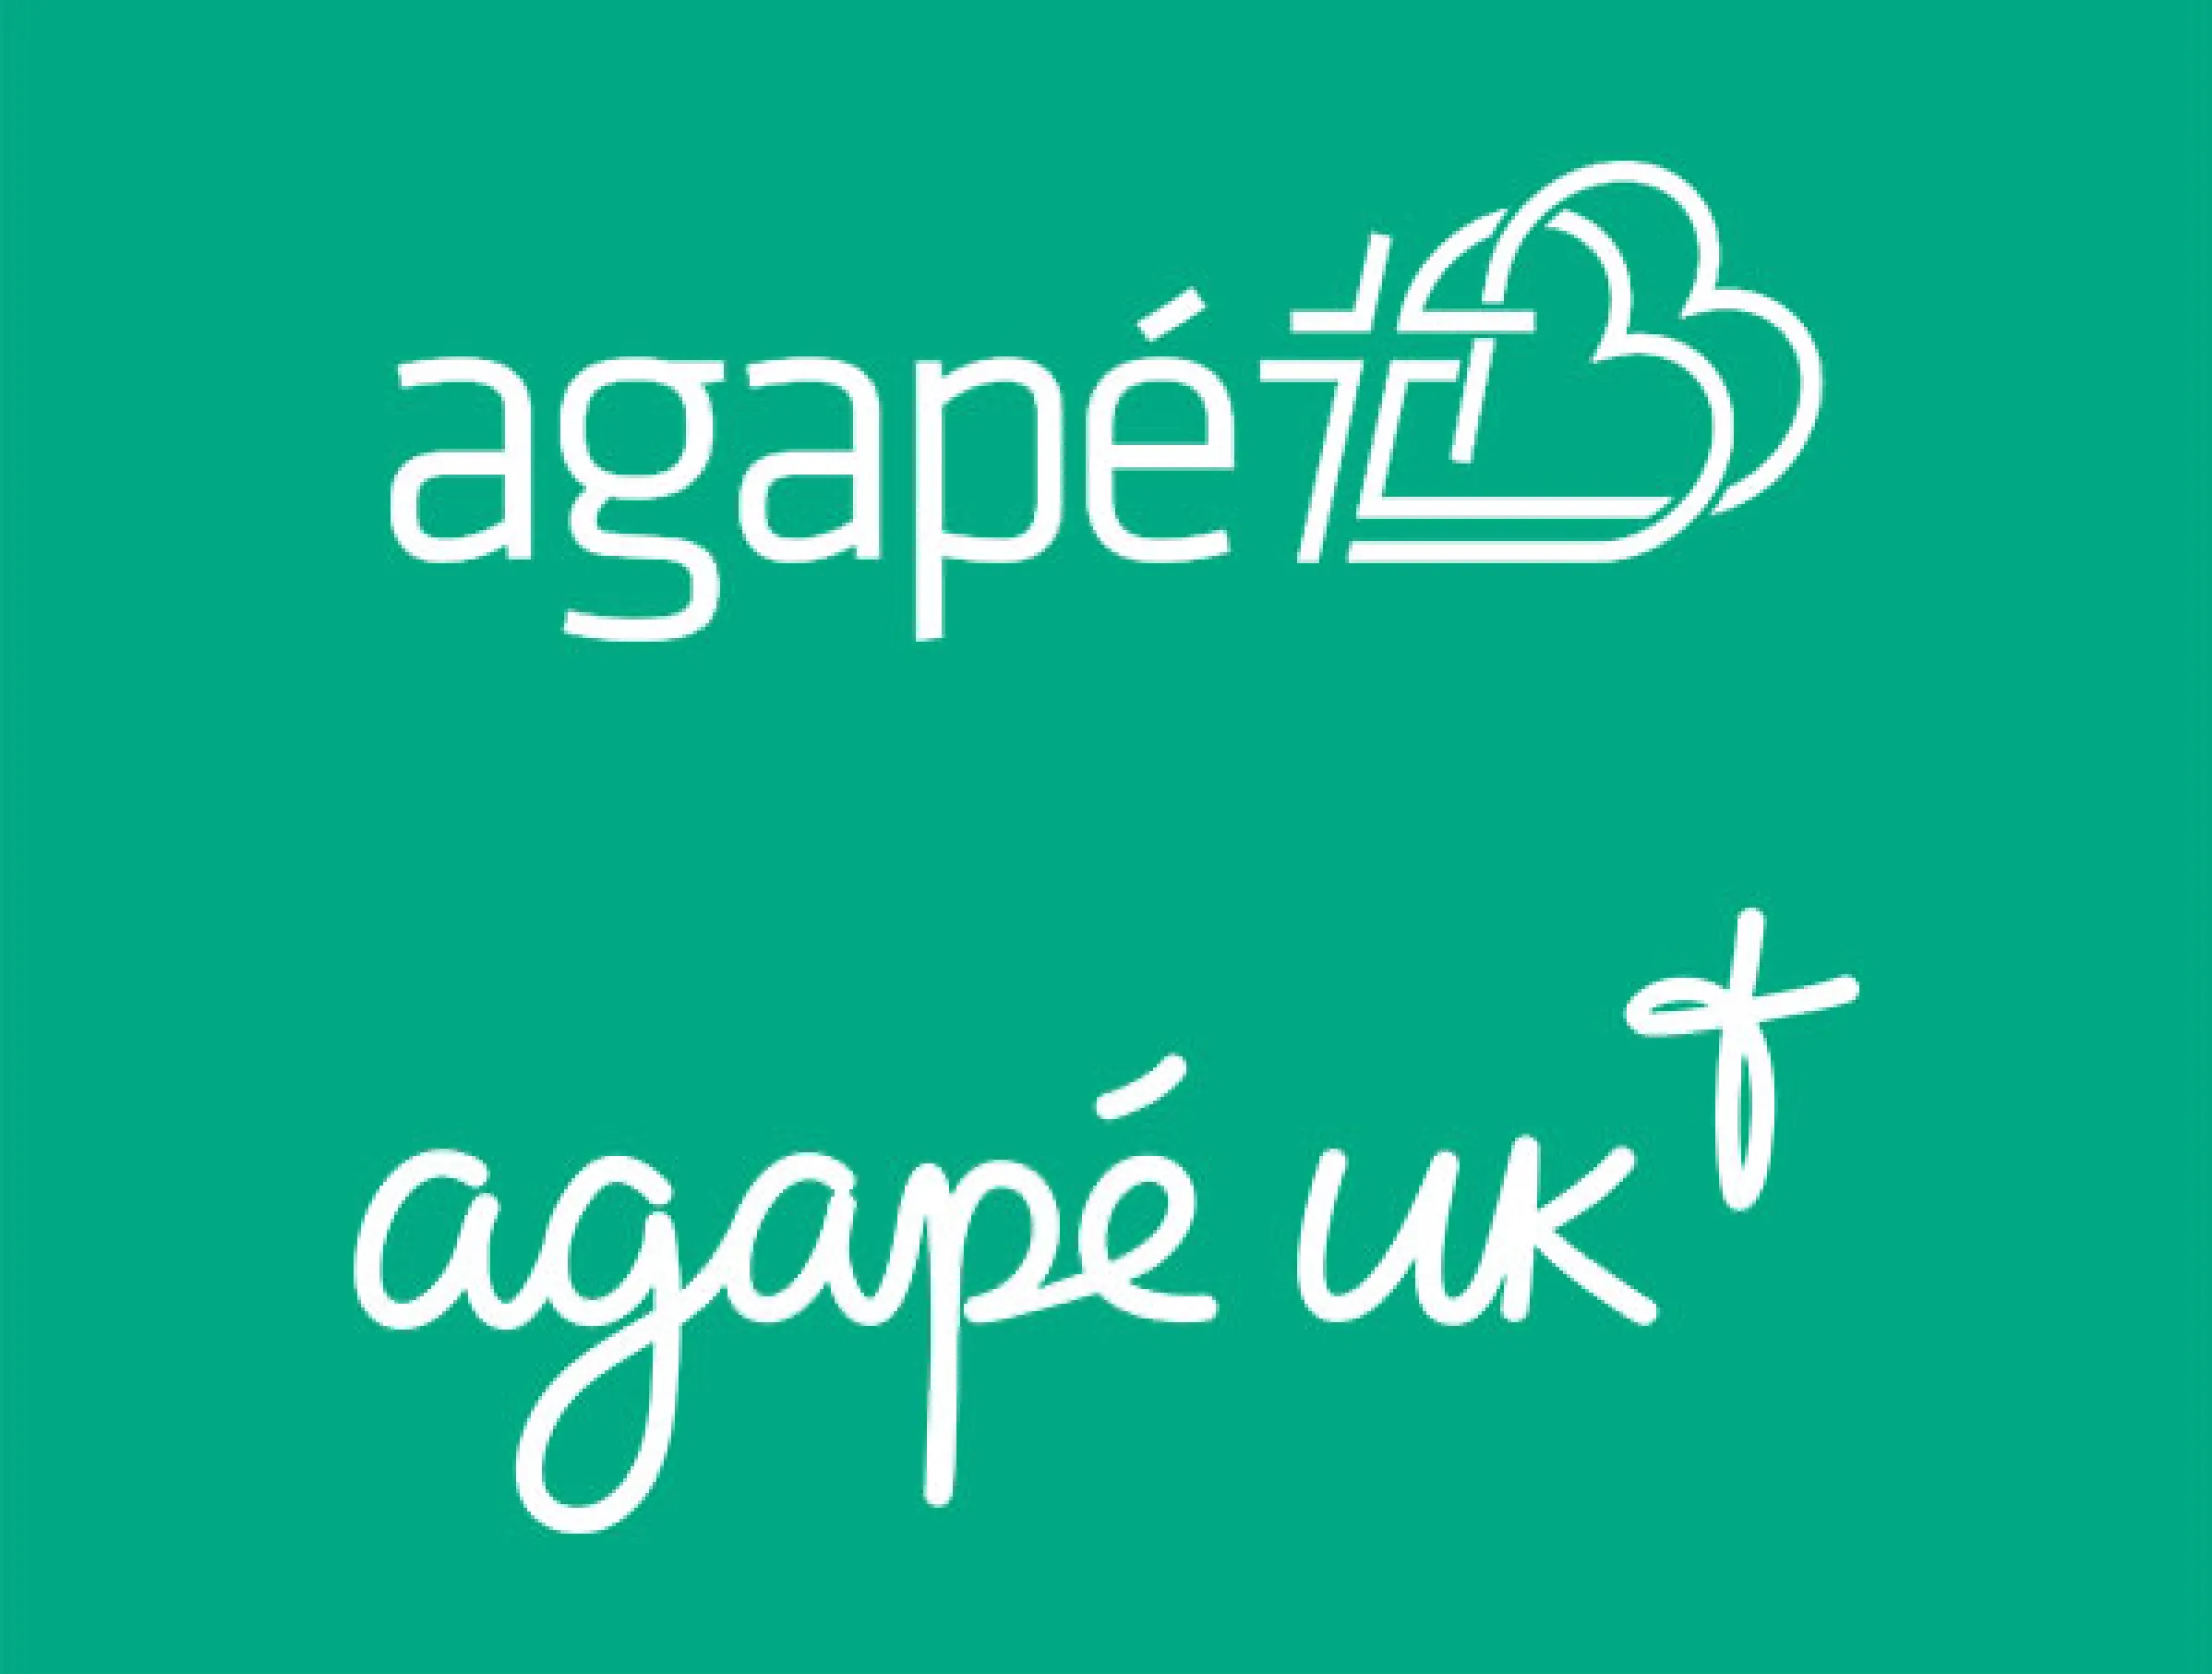 Agape's old and new logo